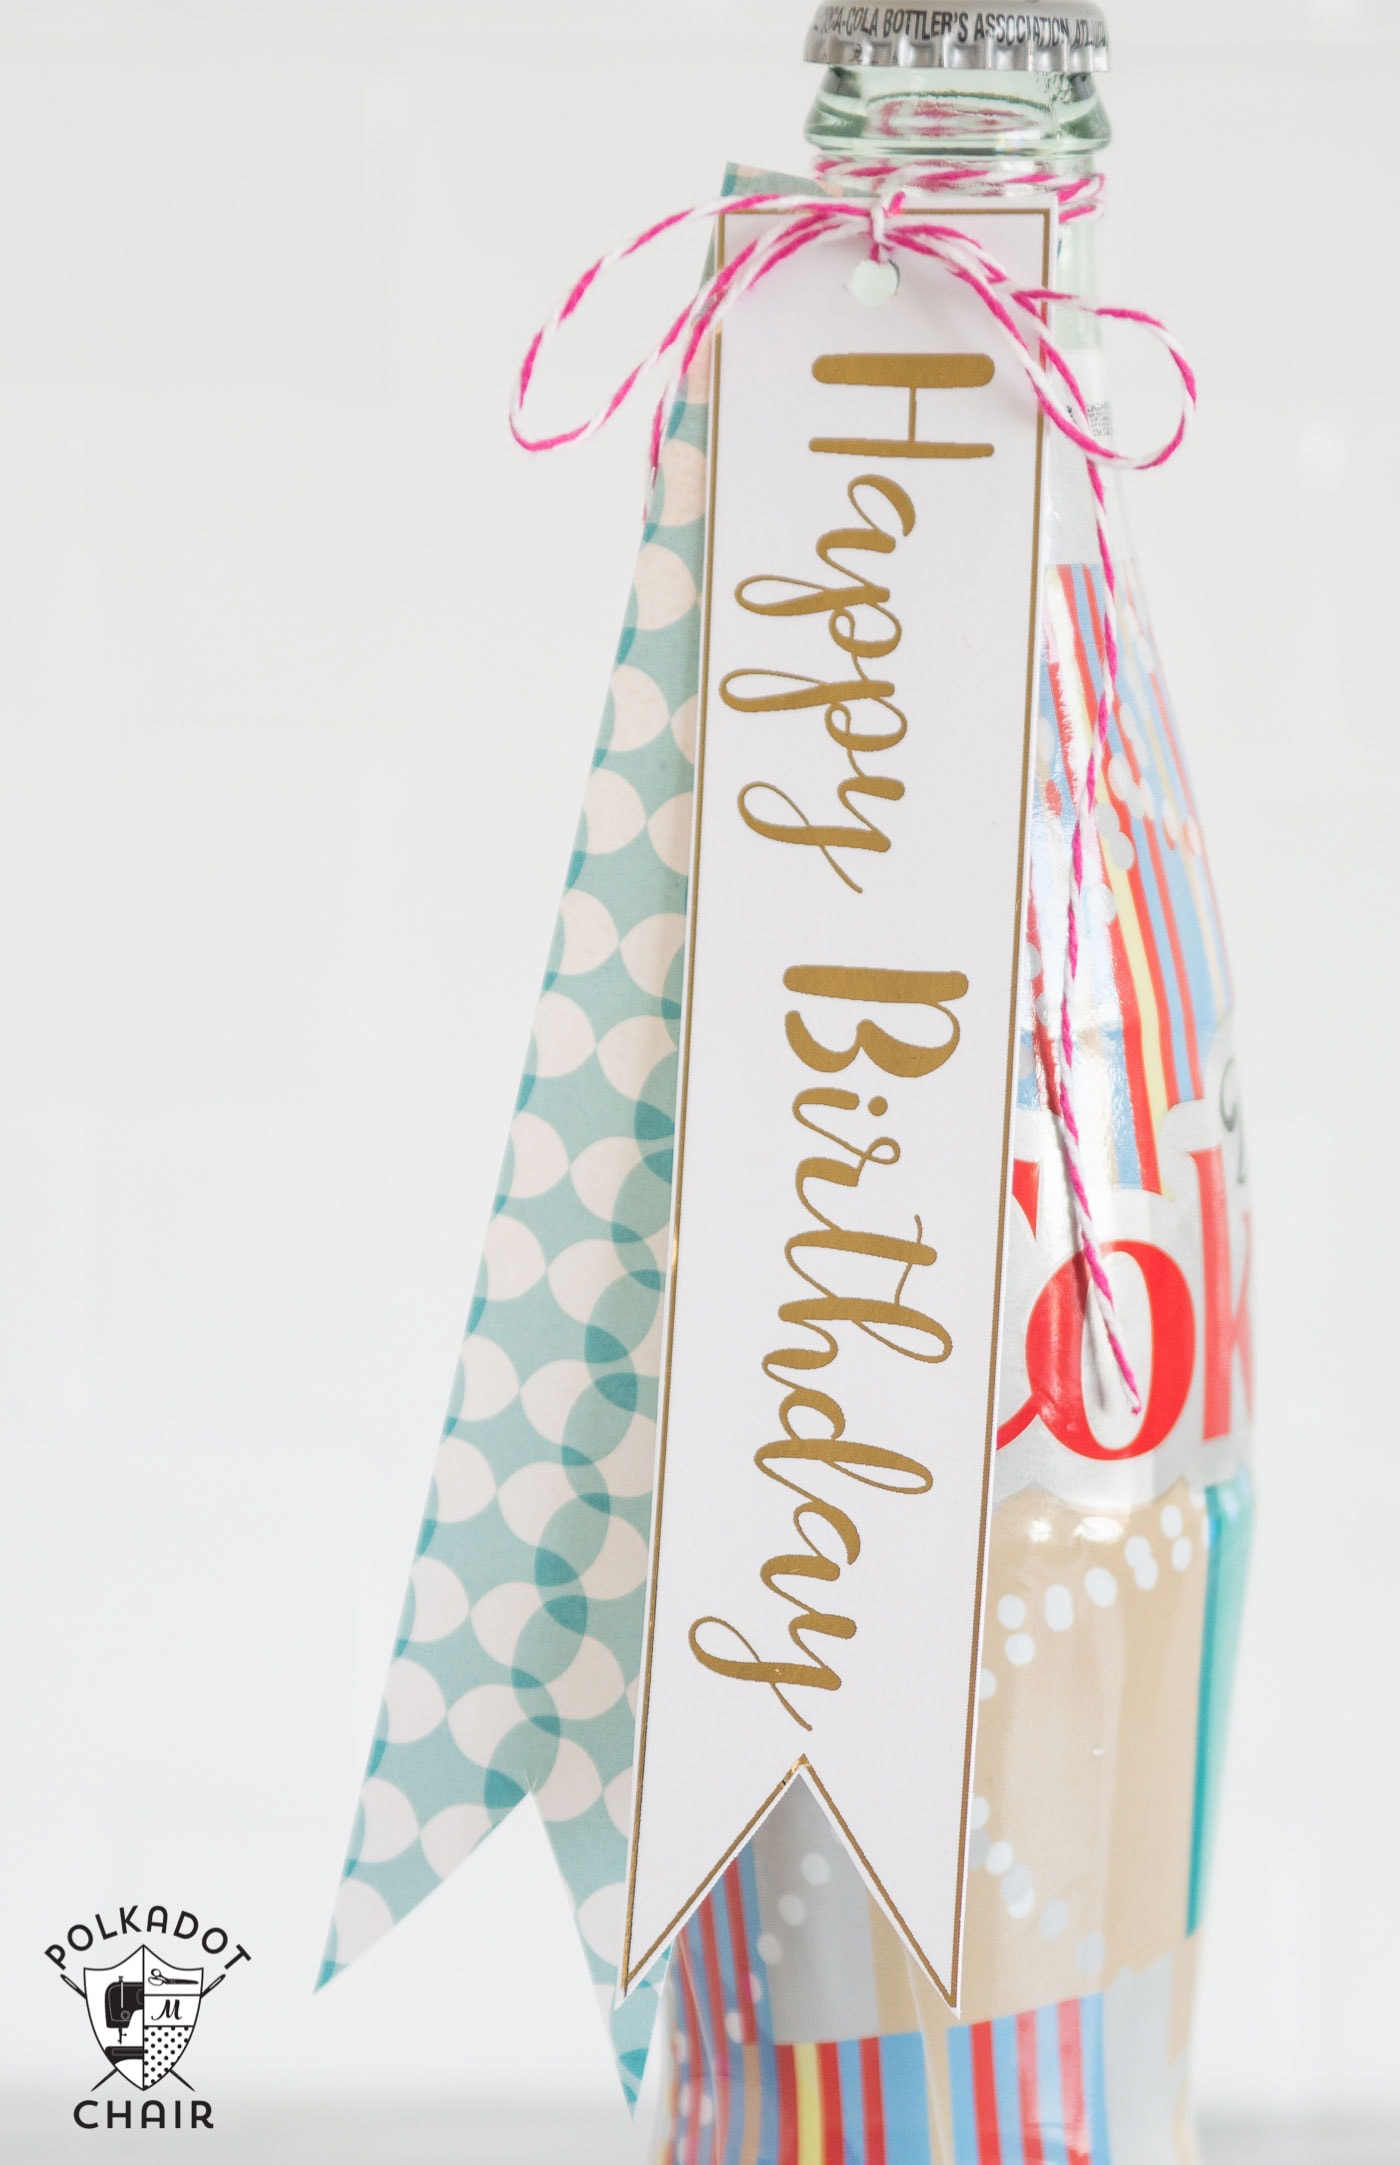 Free Printable Diet Coke Gift Tags; perfect for gifts for teachers - lots of cute gift ideas for friends or neighbors too. Love the Happy Birthday Tags! 